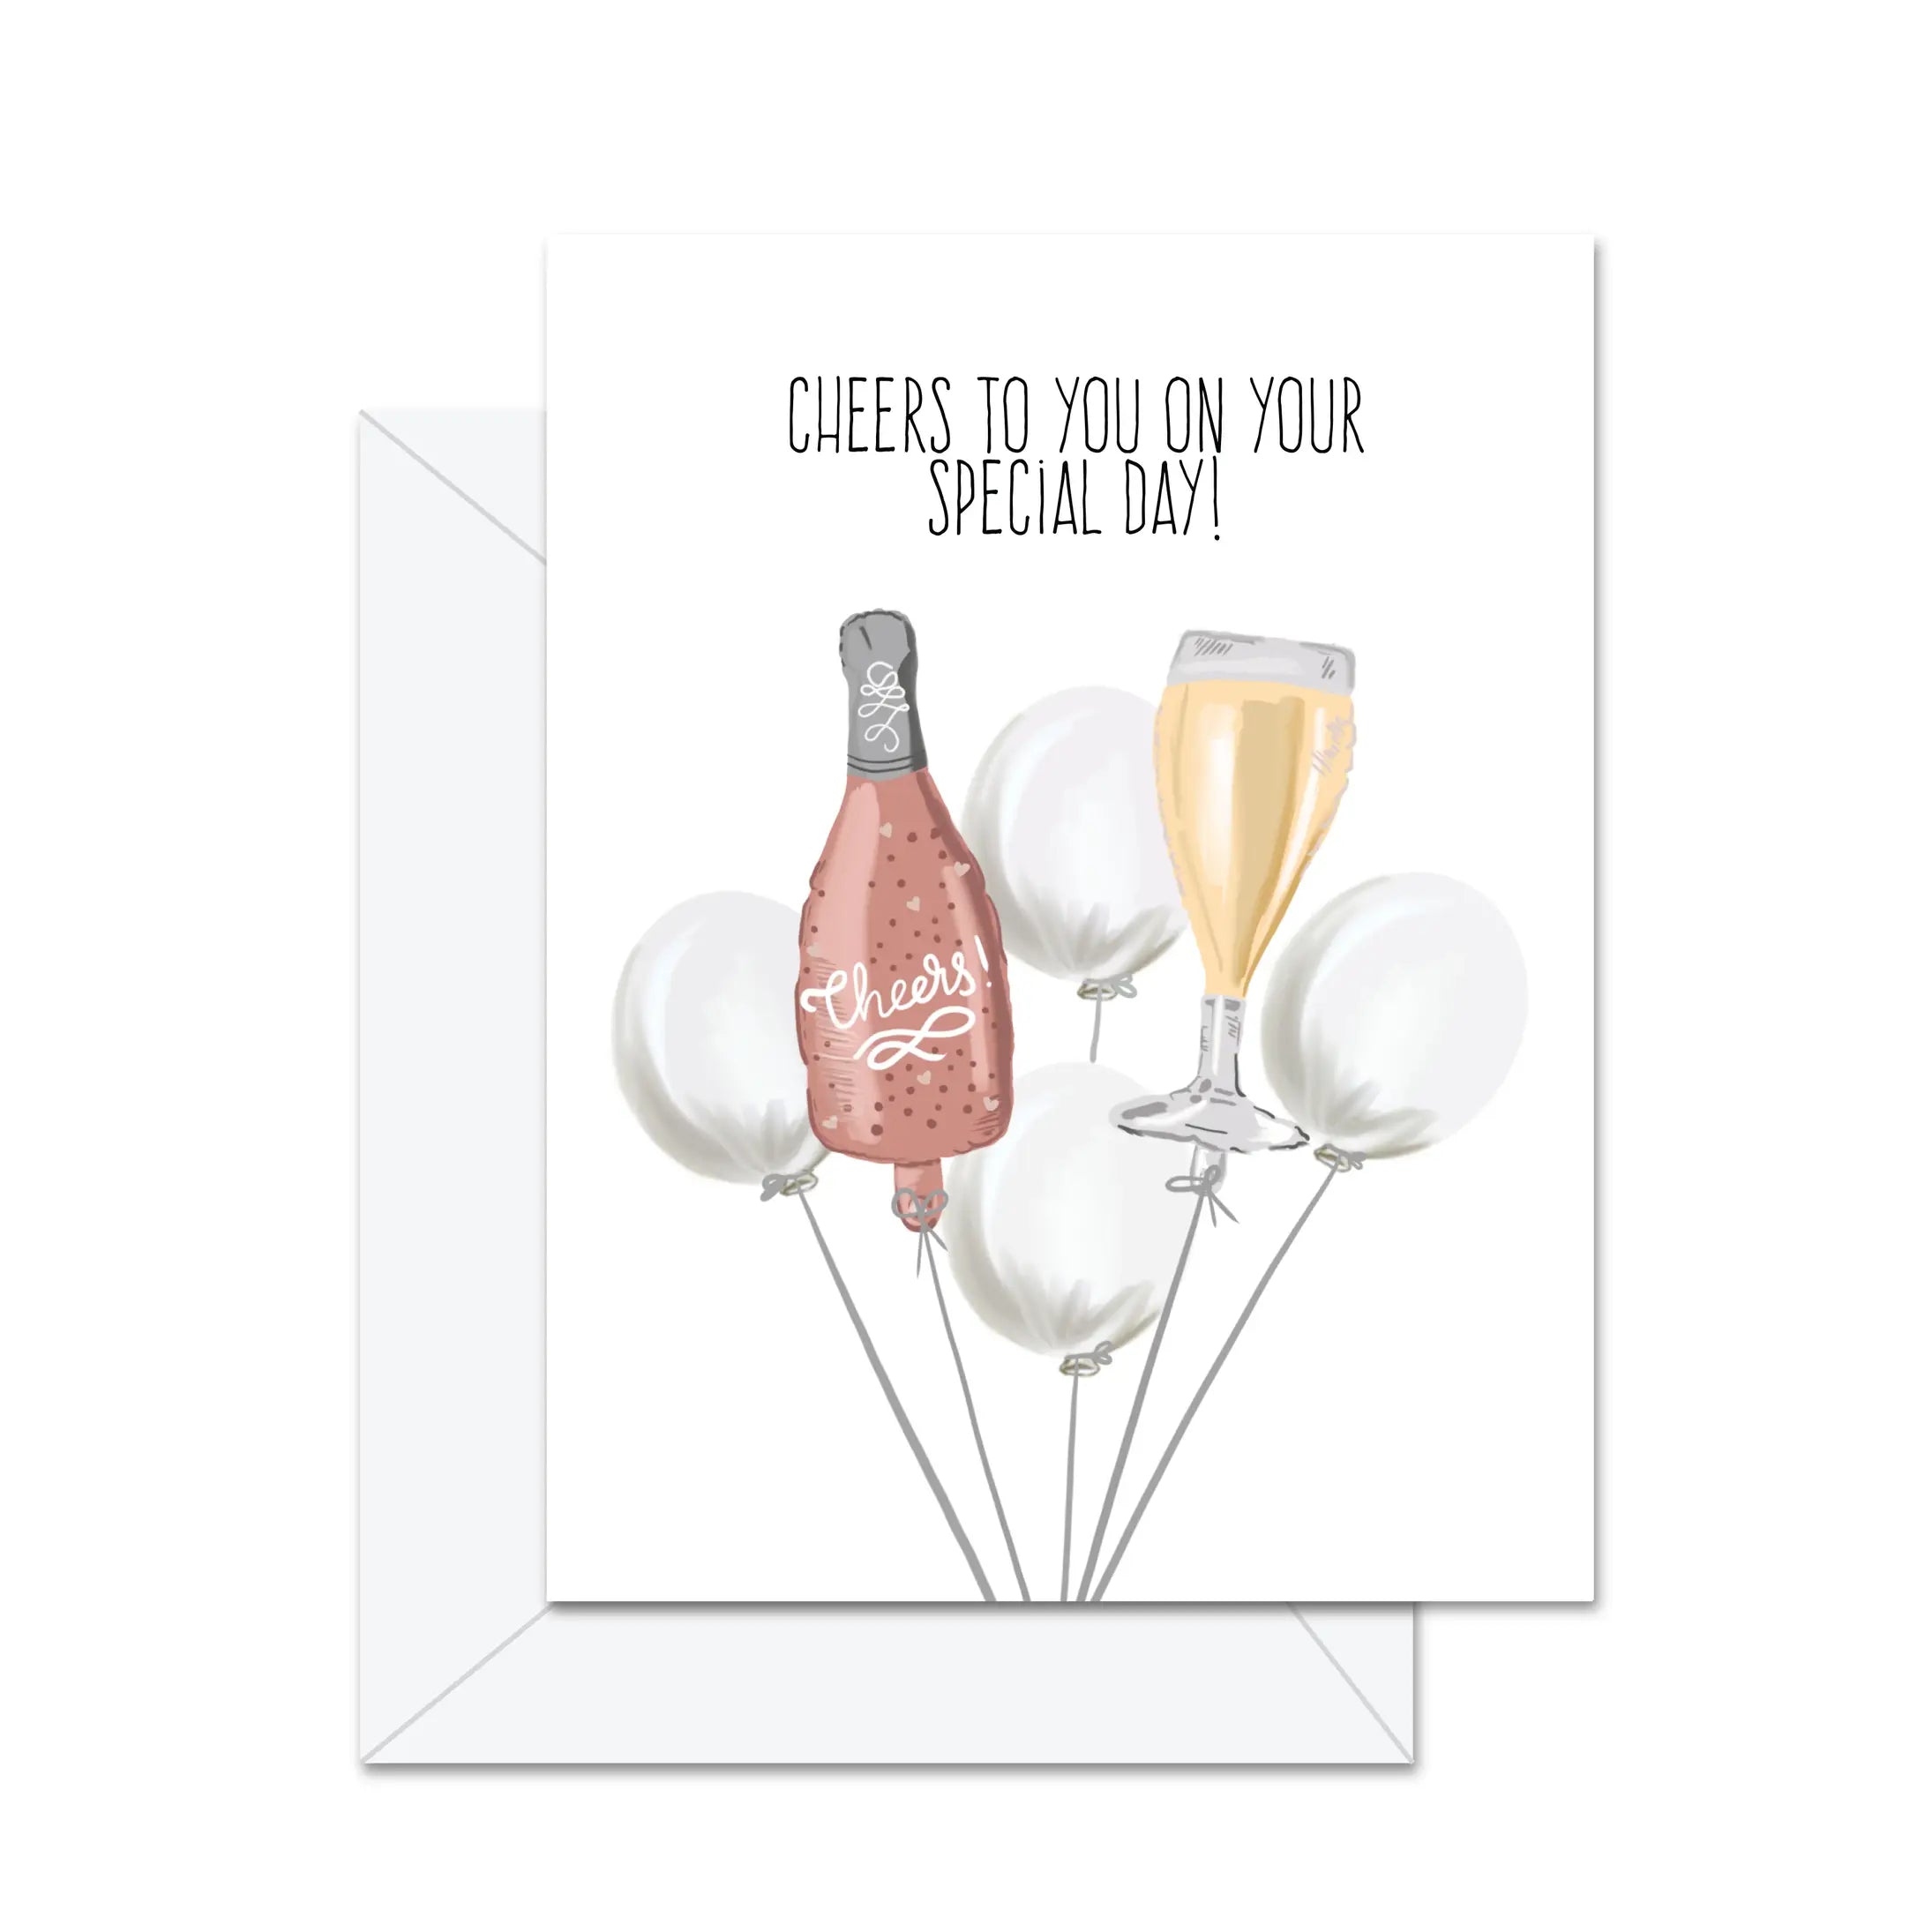 Cheers To You On Your Special Day! - Greeting Card